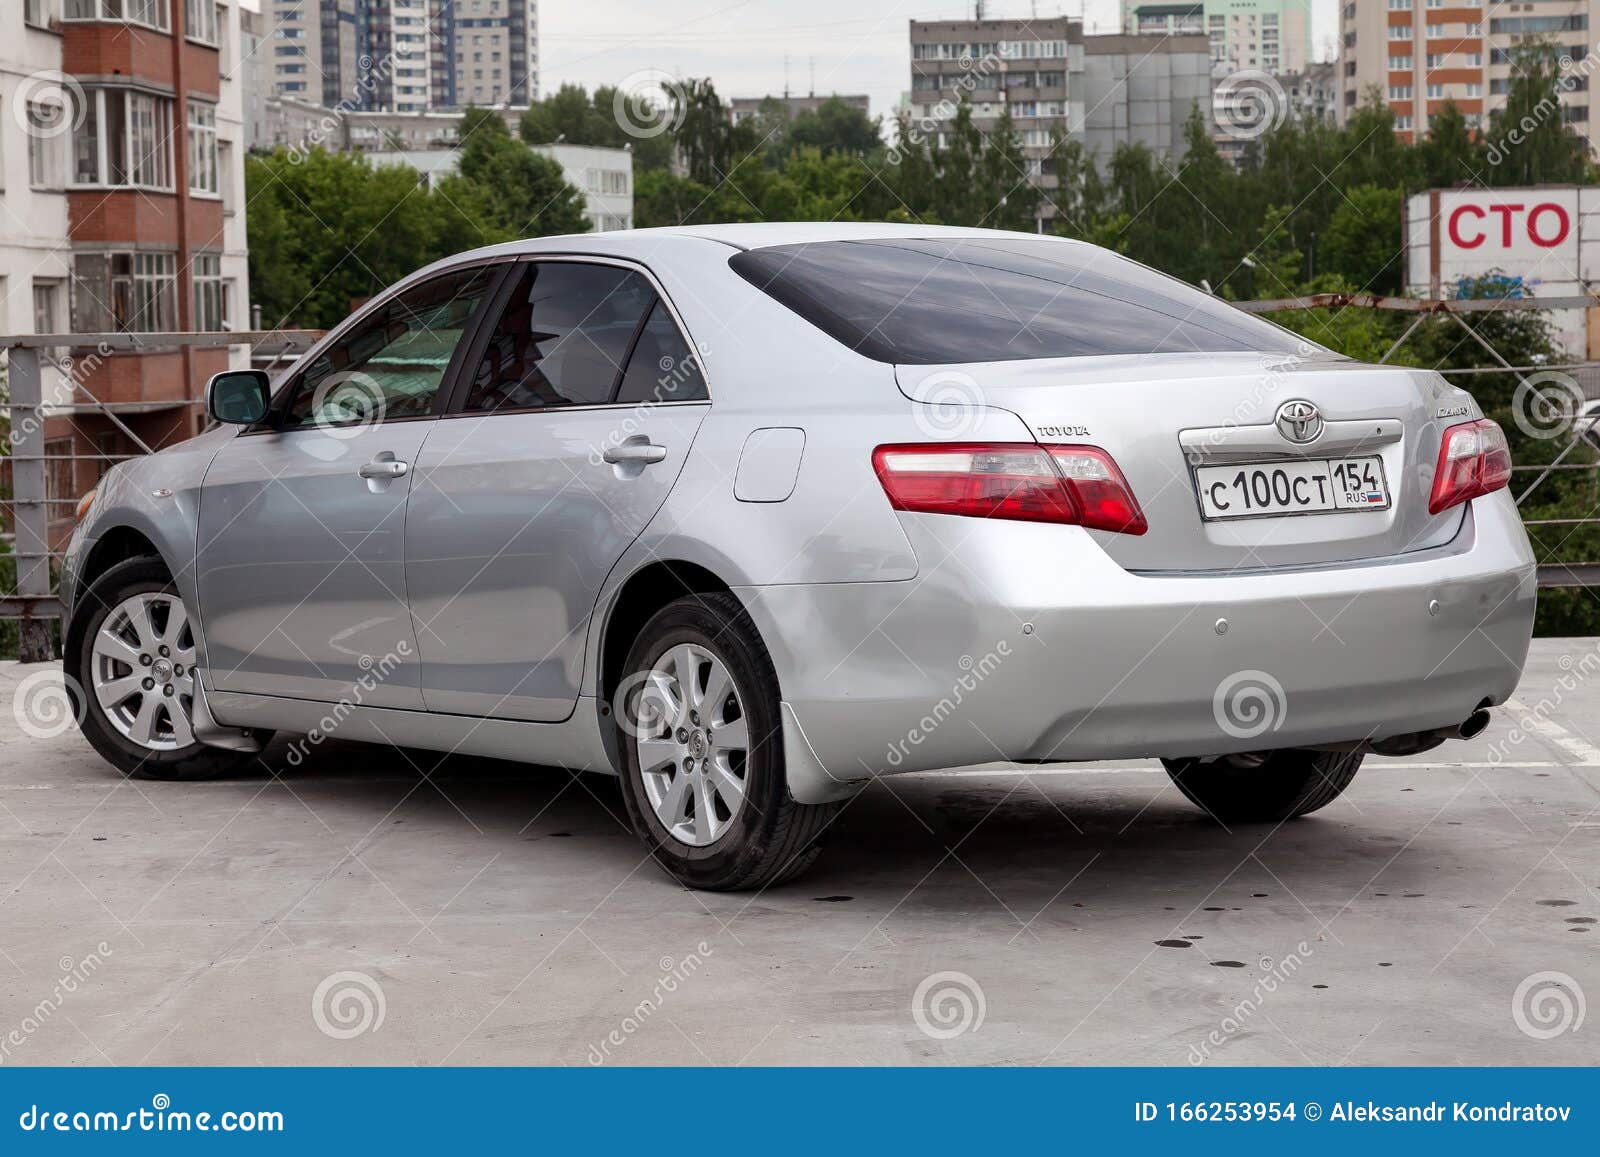 Used 2006 TOYOTA CAMRY 24G LIMITED EDITIONDBAACV40 for Sale BF442674   BE FORWARD